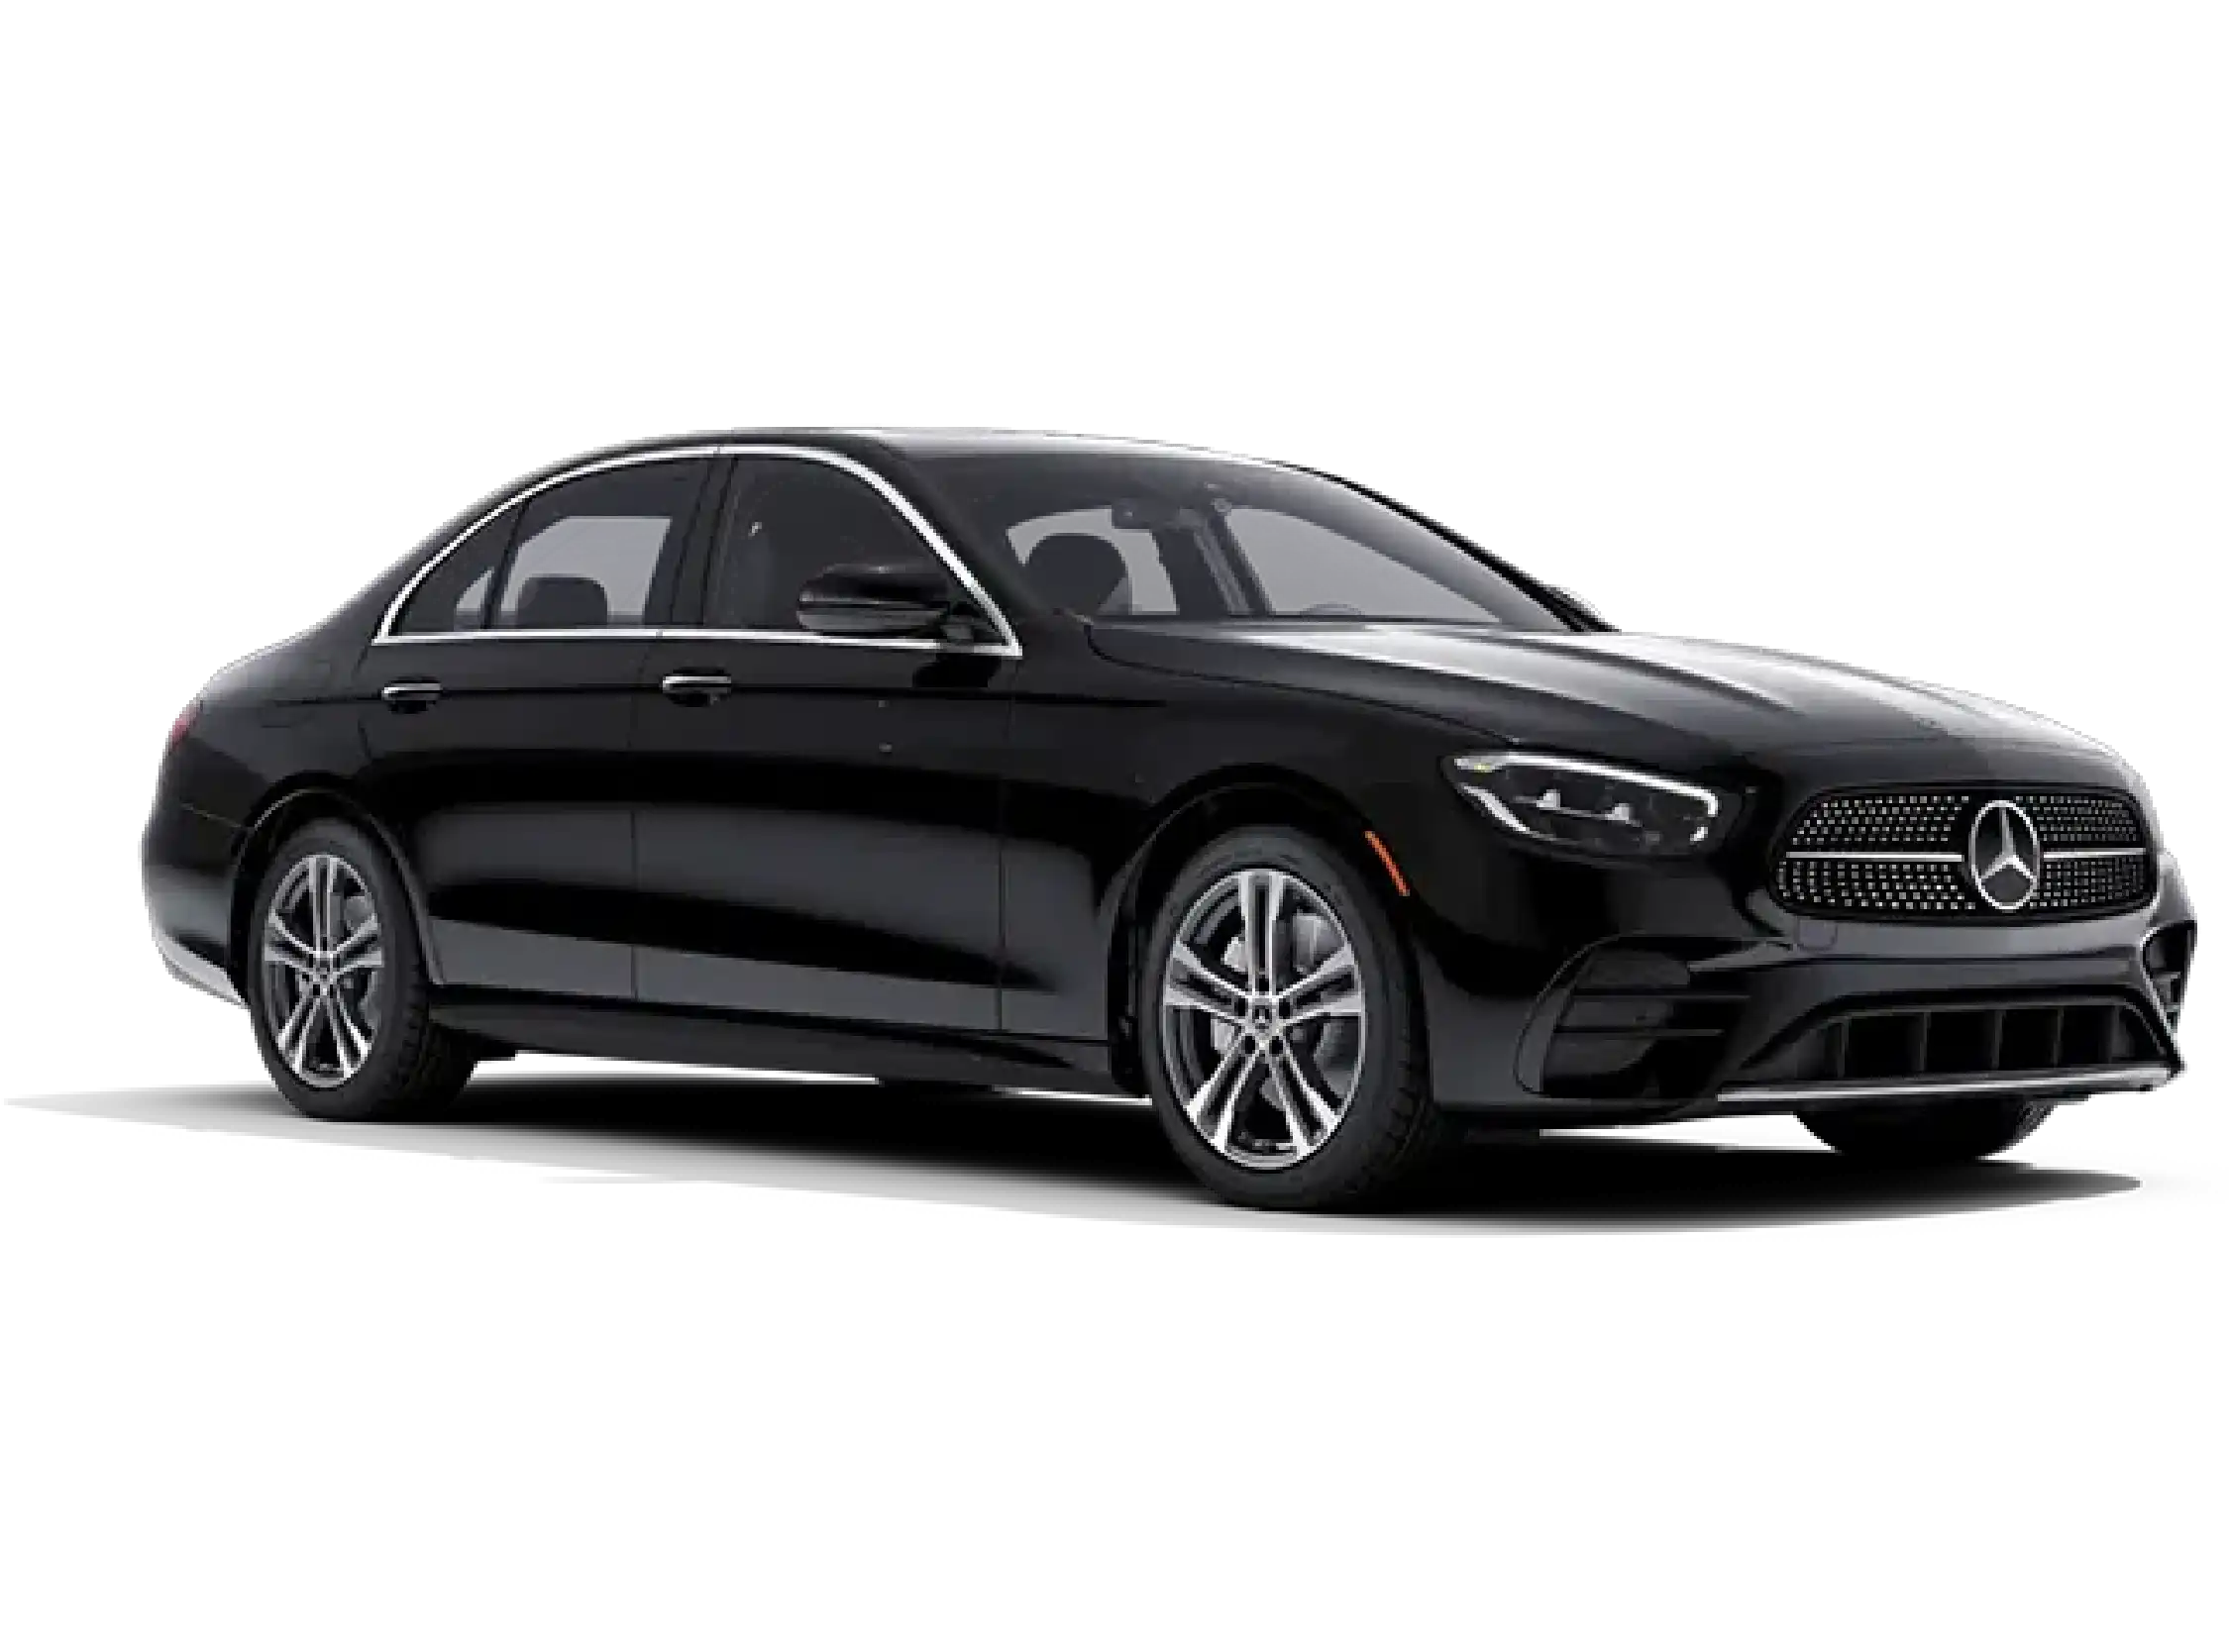 Travel in luxury and comfort with LavishRide's Business Class Sedans - the ultimate transportation experience.